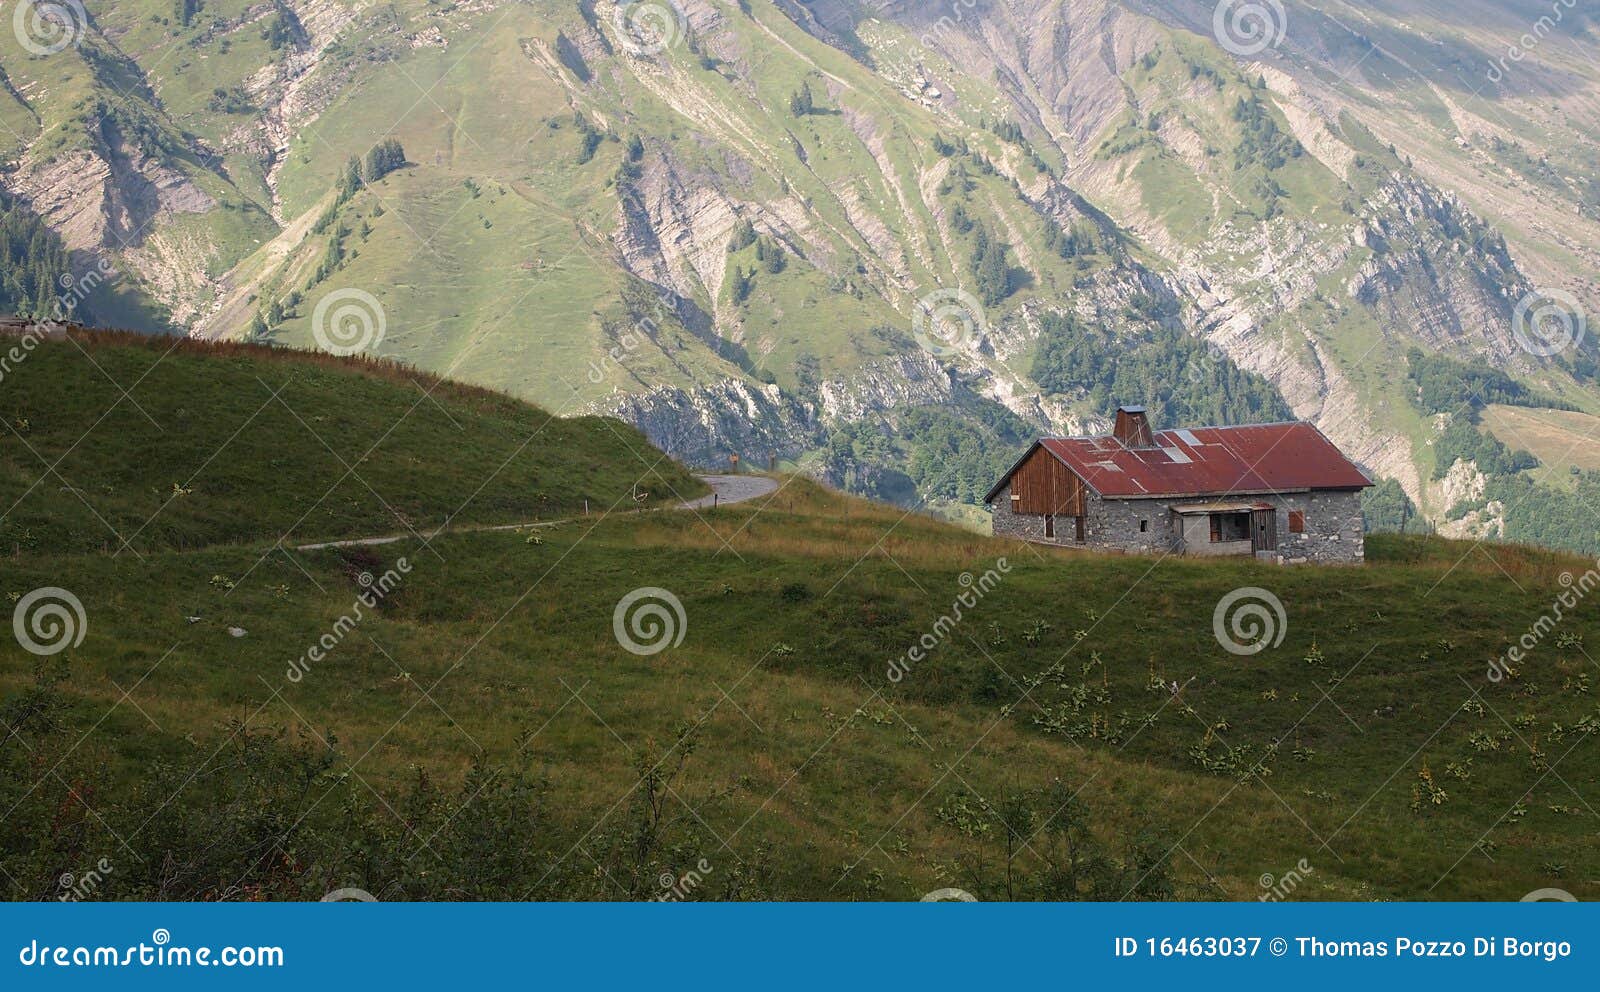 french chalet with surrounding moutains